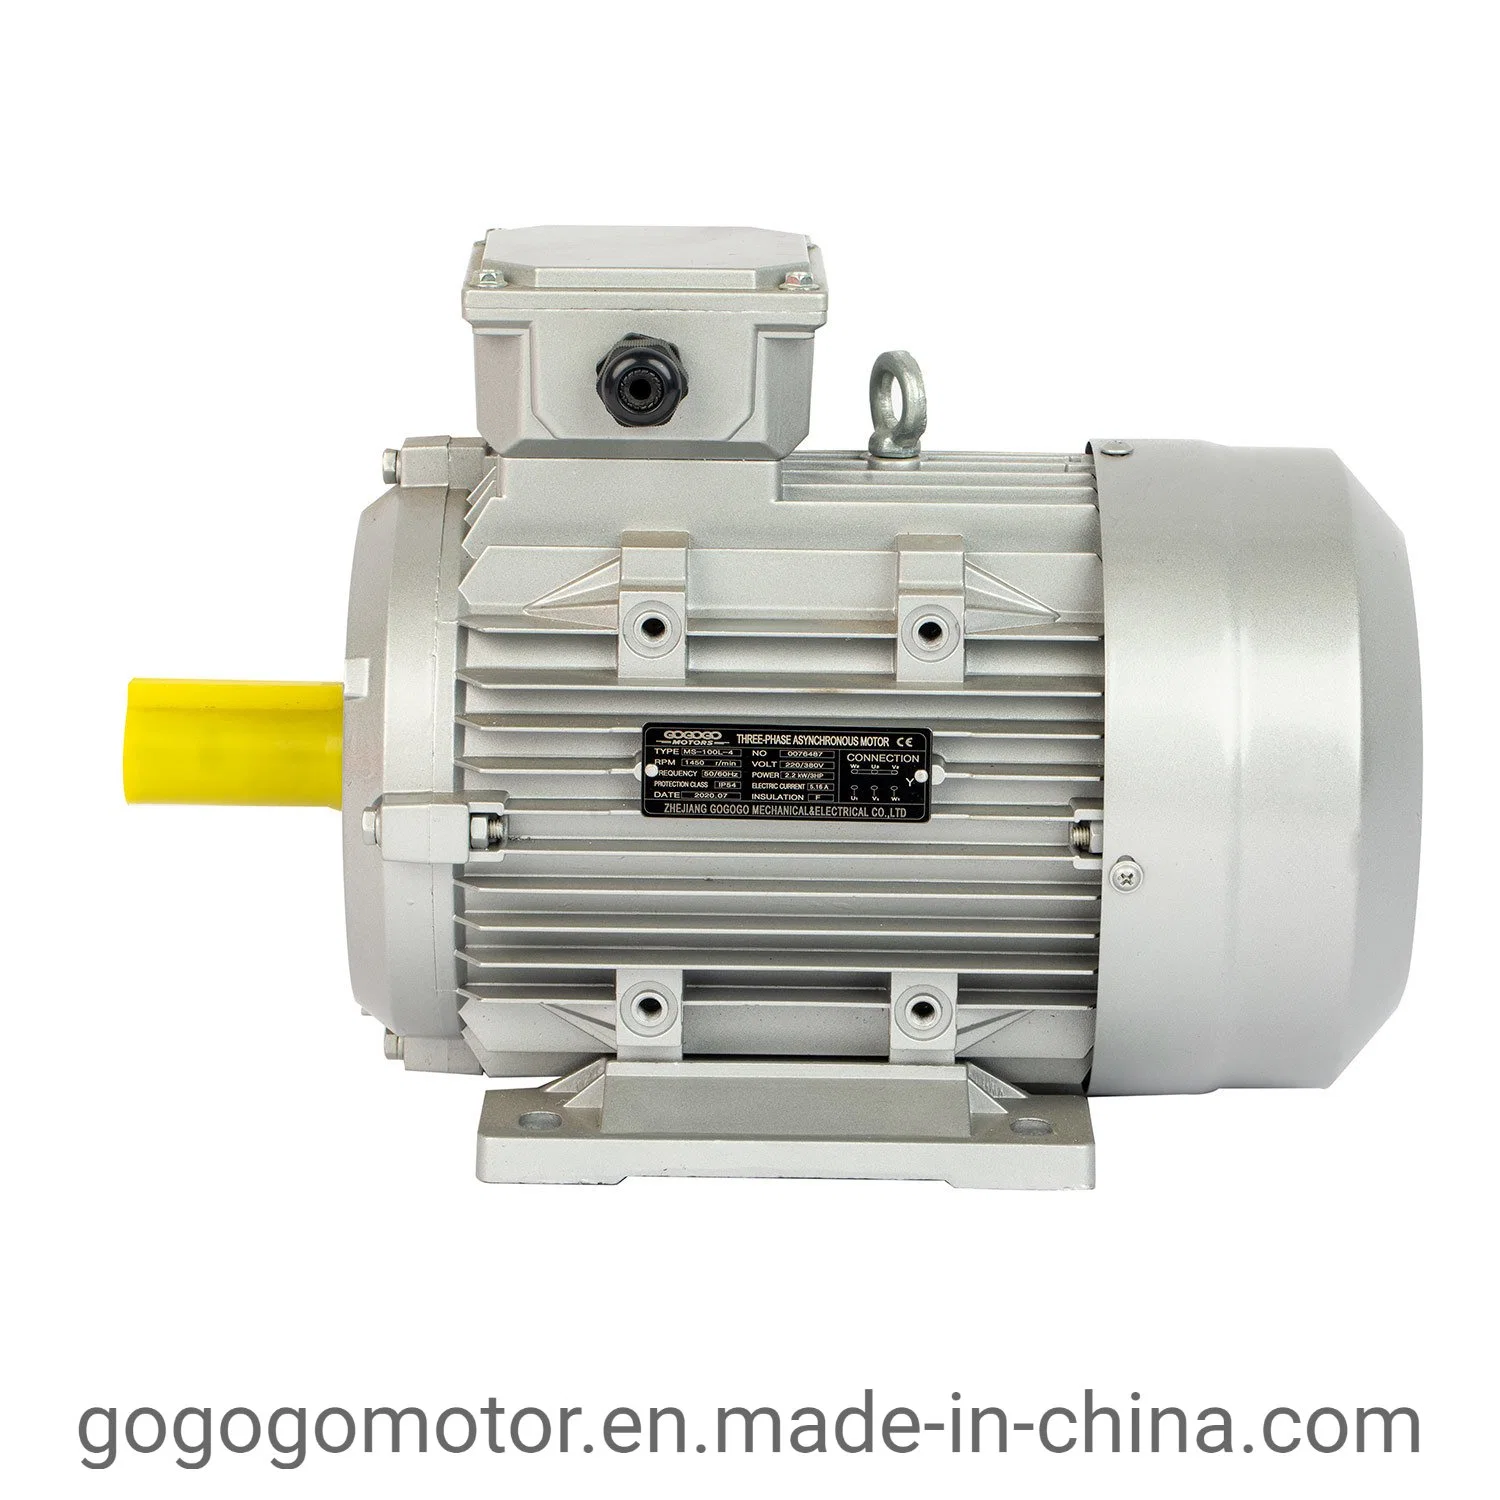 Yy My Series Capacitor Running Premium High Efficiency Single Phase Induction AC Electric Asynchronous Motor Factory